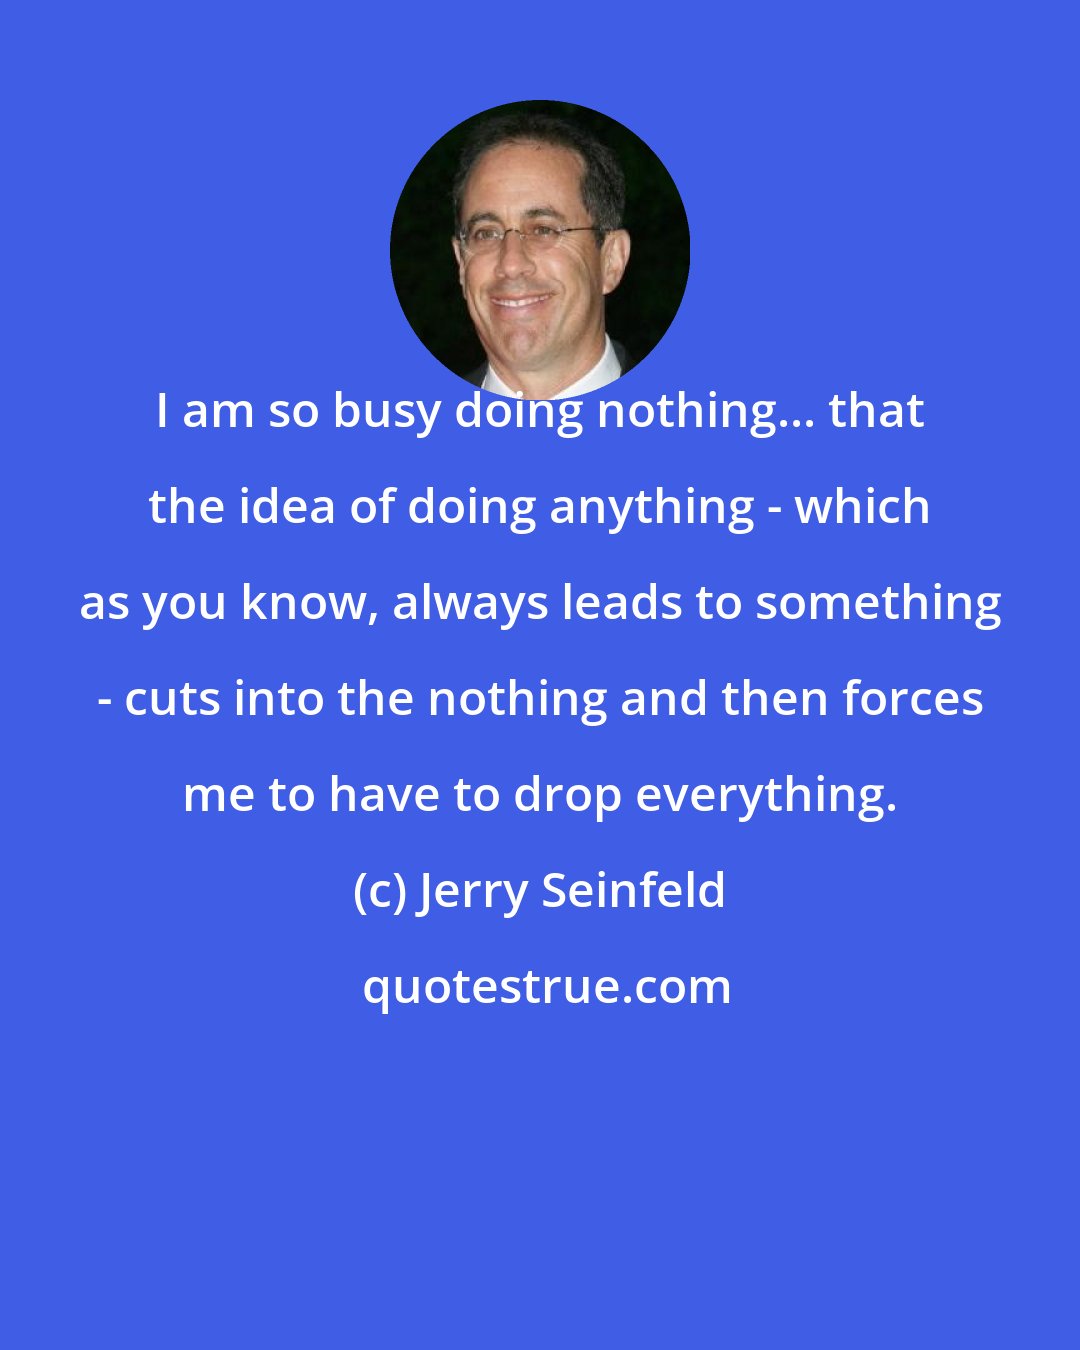 Jerry Seinfeld: I am so busy doing nothing... that the idea of doing anything - which as you know, always leads to something - cuts into the nothing and then forces me to have to drop everything.